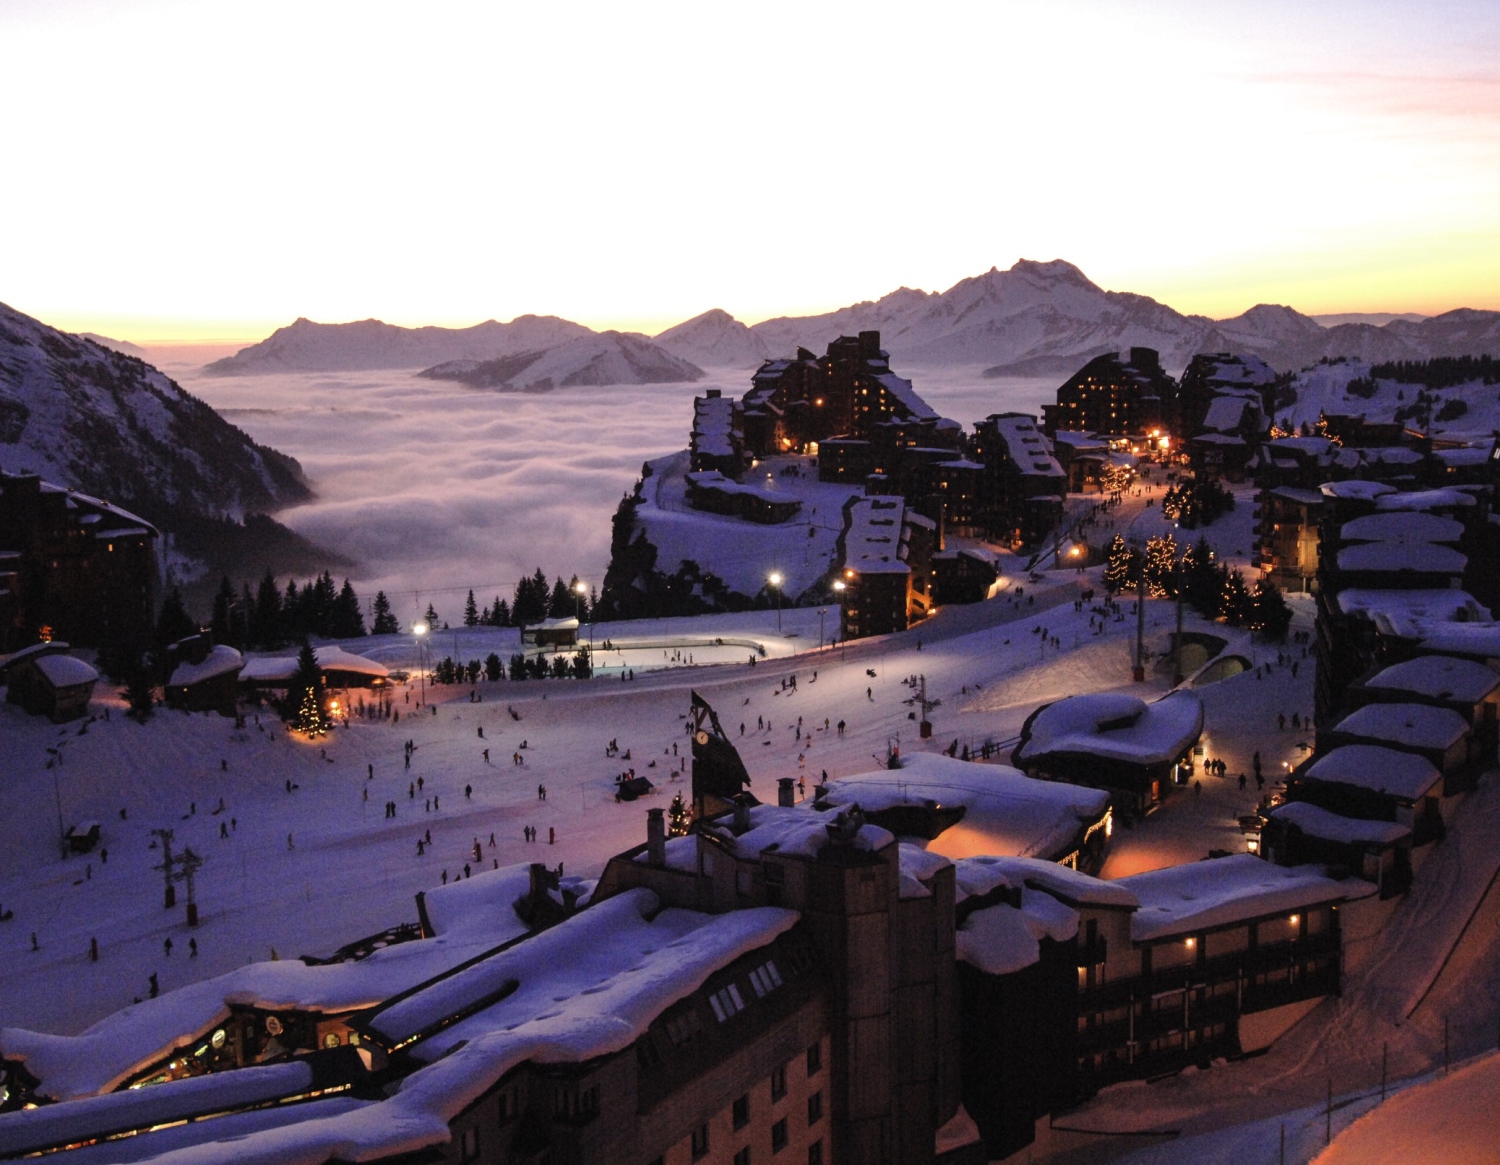 Busy ski resort with mountains in background - Avoriaz, France